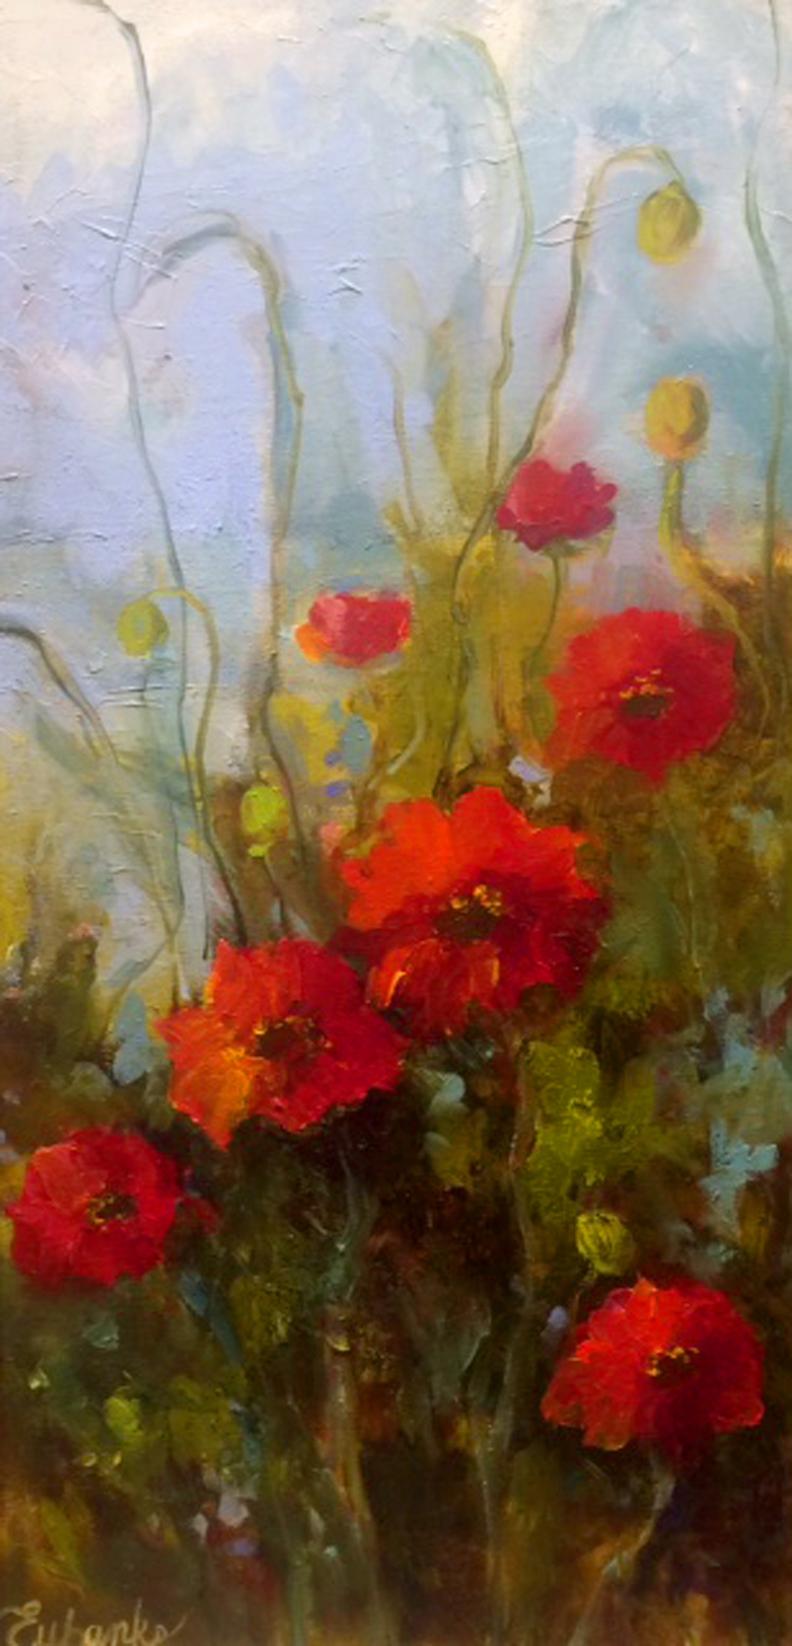 Lori Eubanks' "Wild Flowers" is a 24x12 oil painting on canvas of a wild poppy bush filled with large red blooms set against a blue sky background.

Lori Eubanks is inspired by the French Impressionists, but dedicated to her own unique approach to